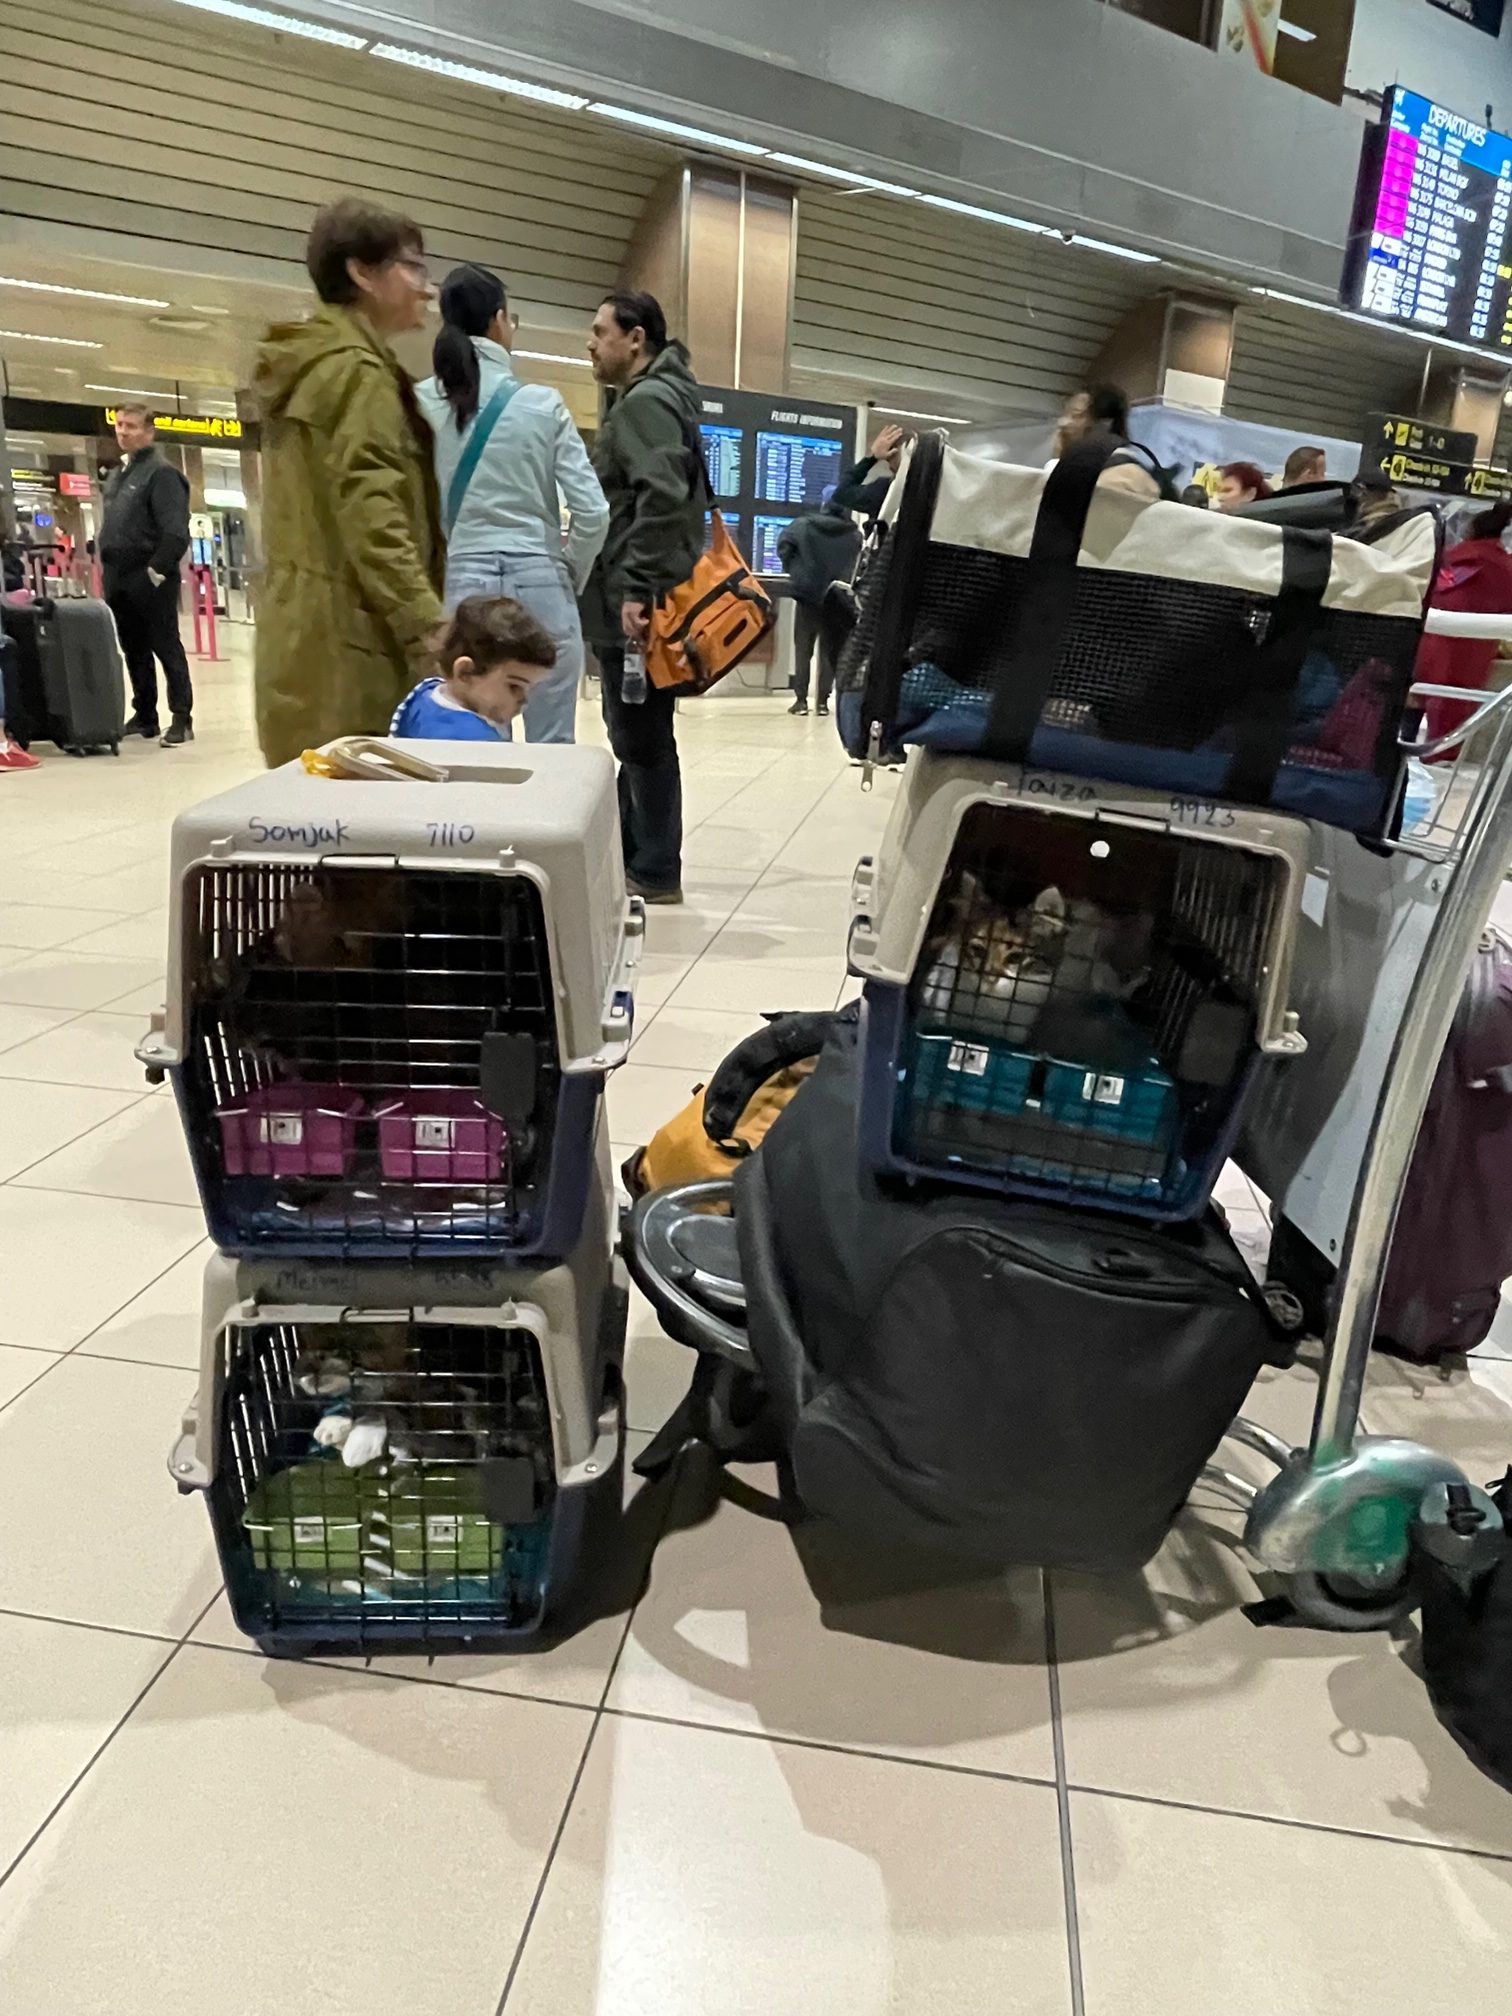 Eight cats in carriers in the airport.